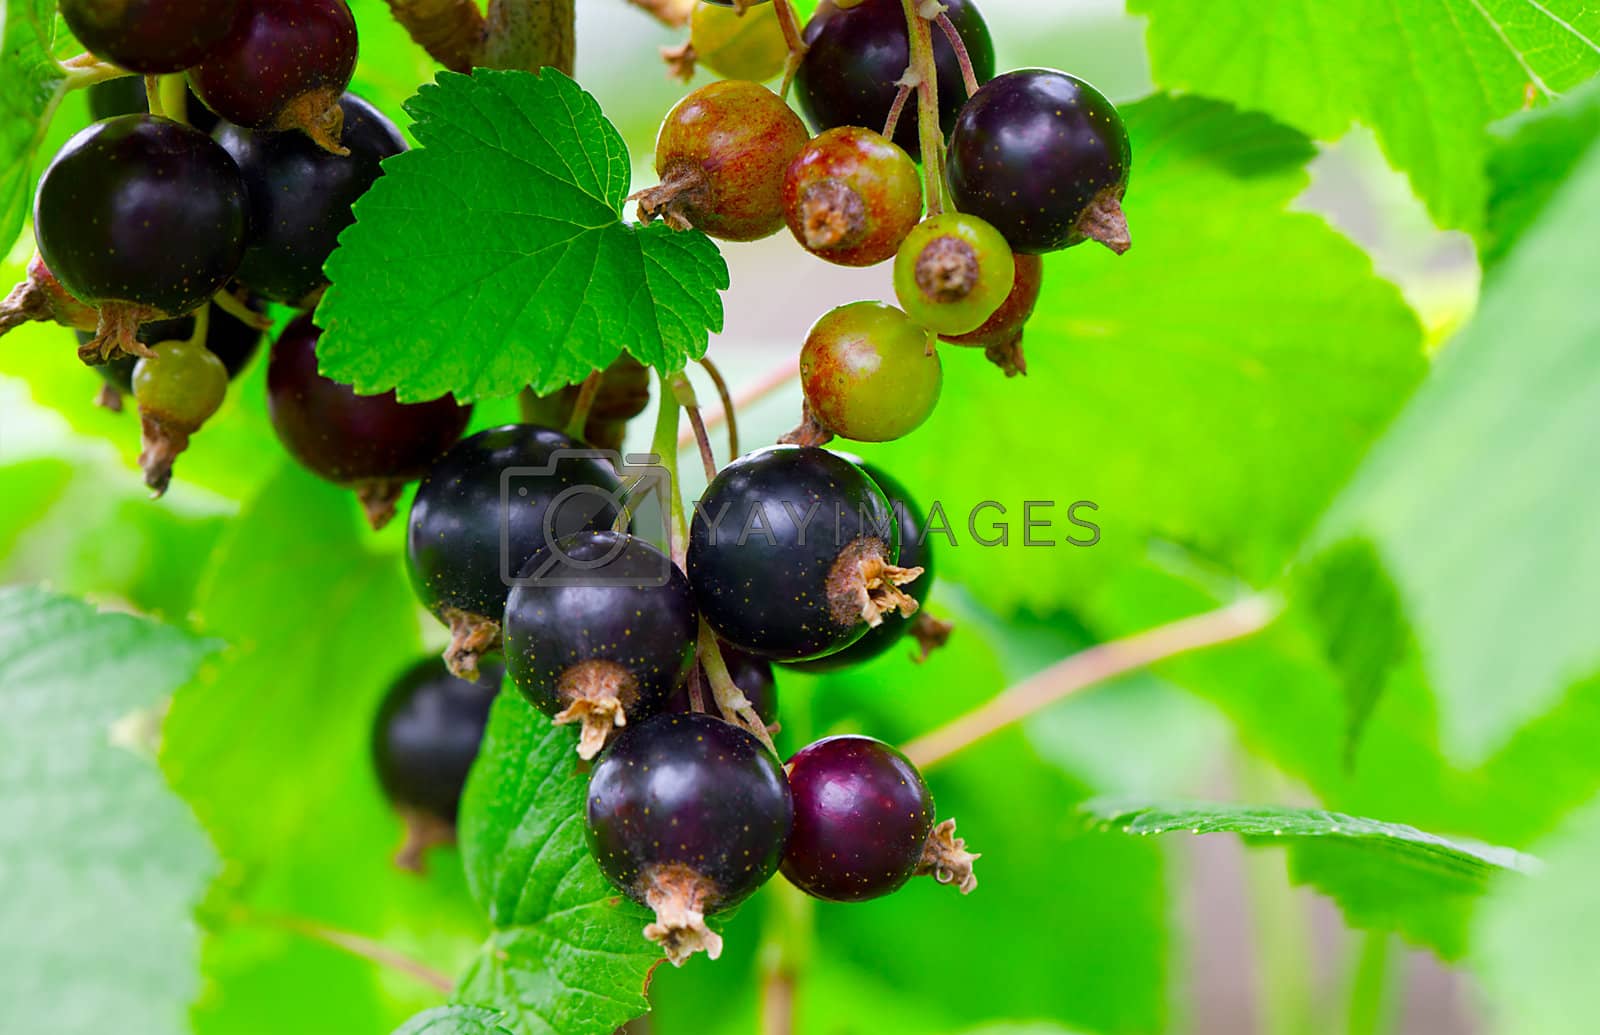 Royalty free image of blackcurrant in the garden by motorolka